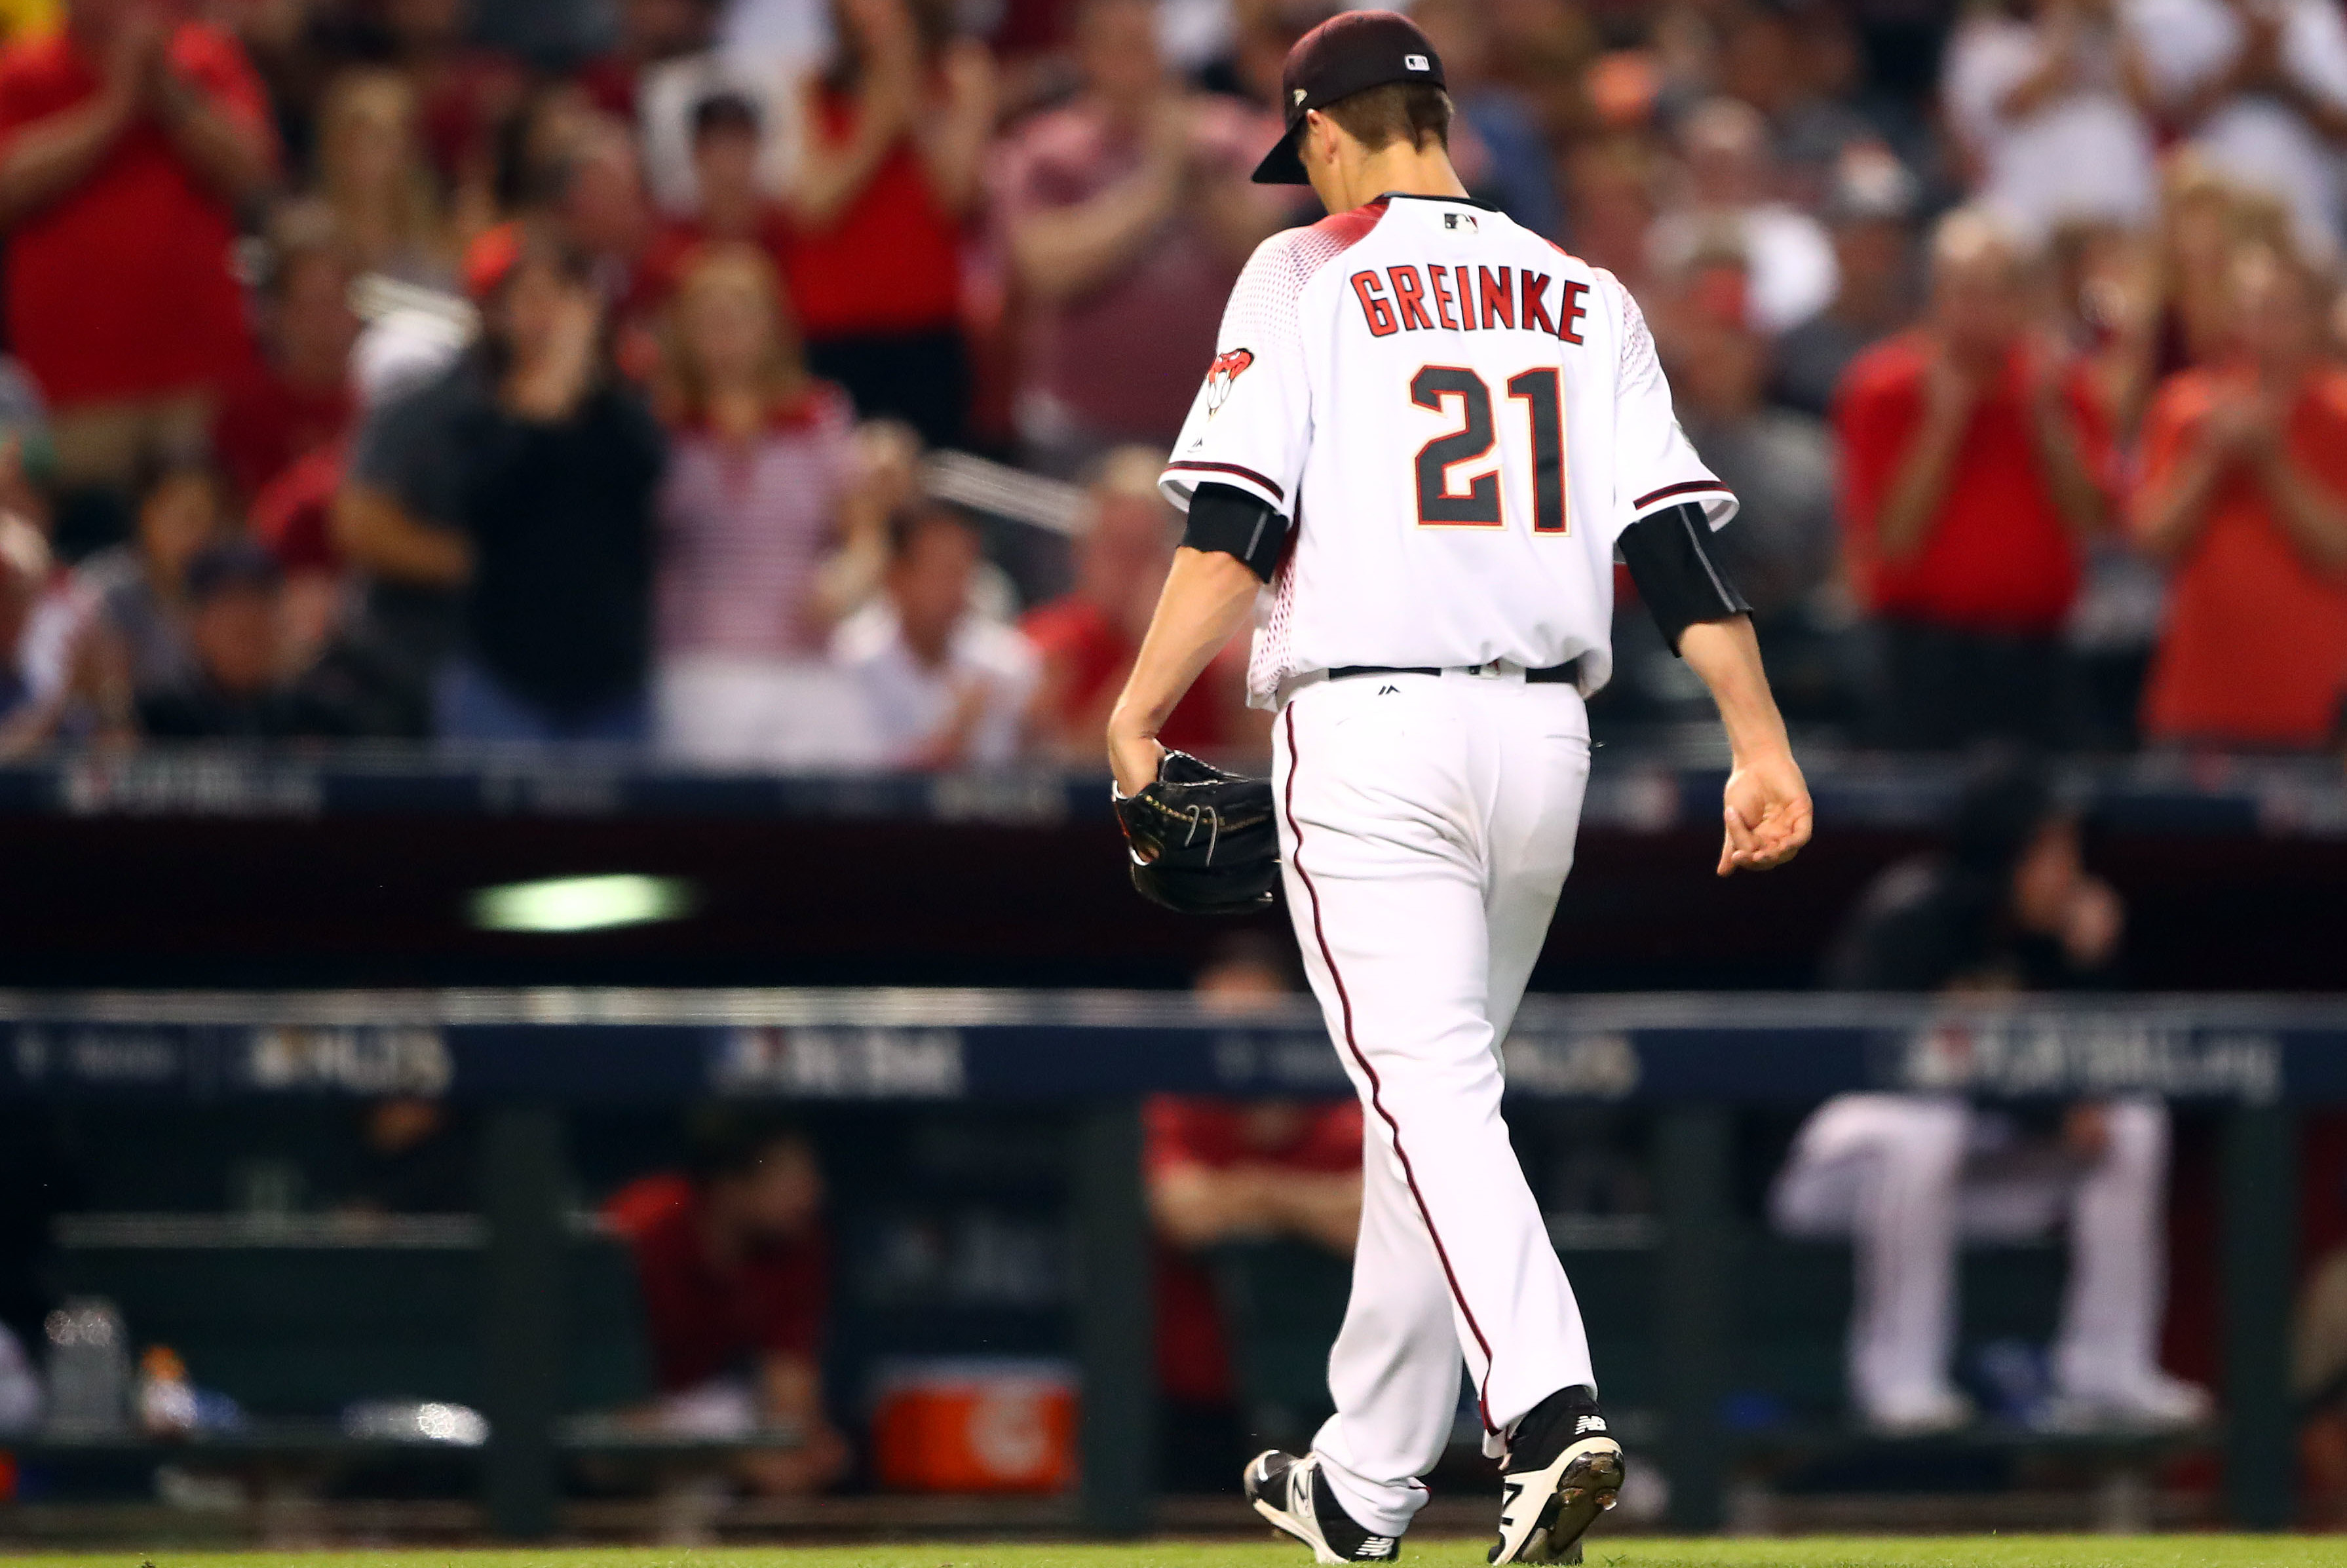 Zack Greinke says he prefers playing without fans in ballparks – The